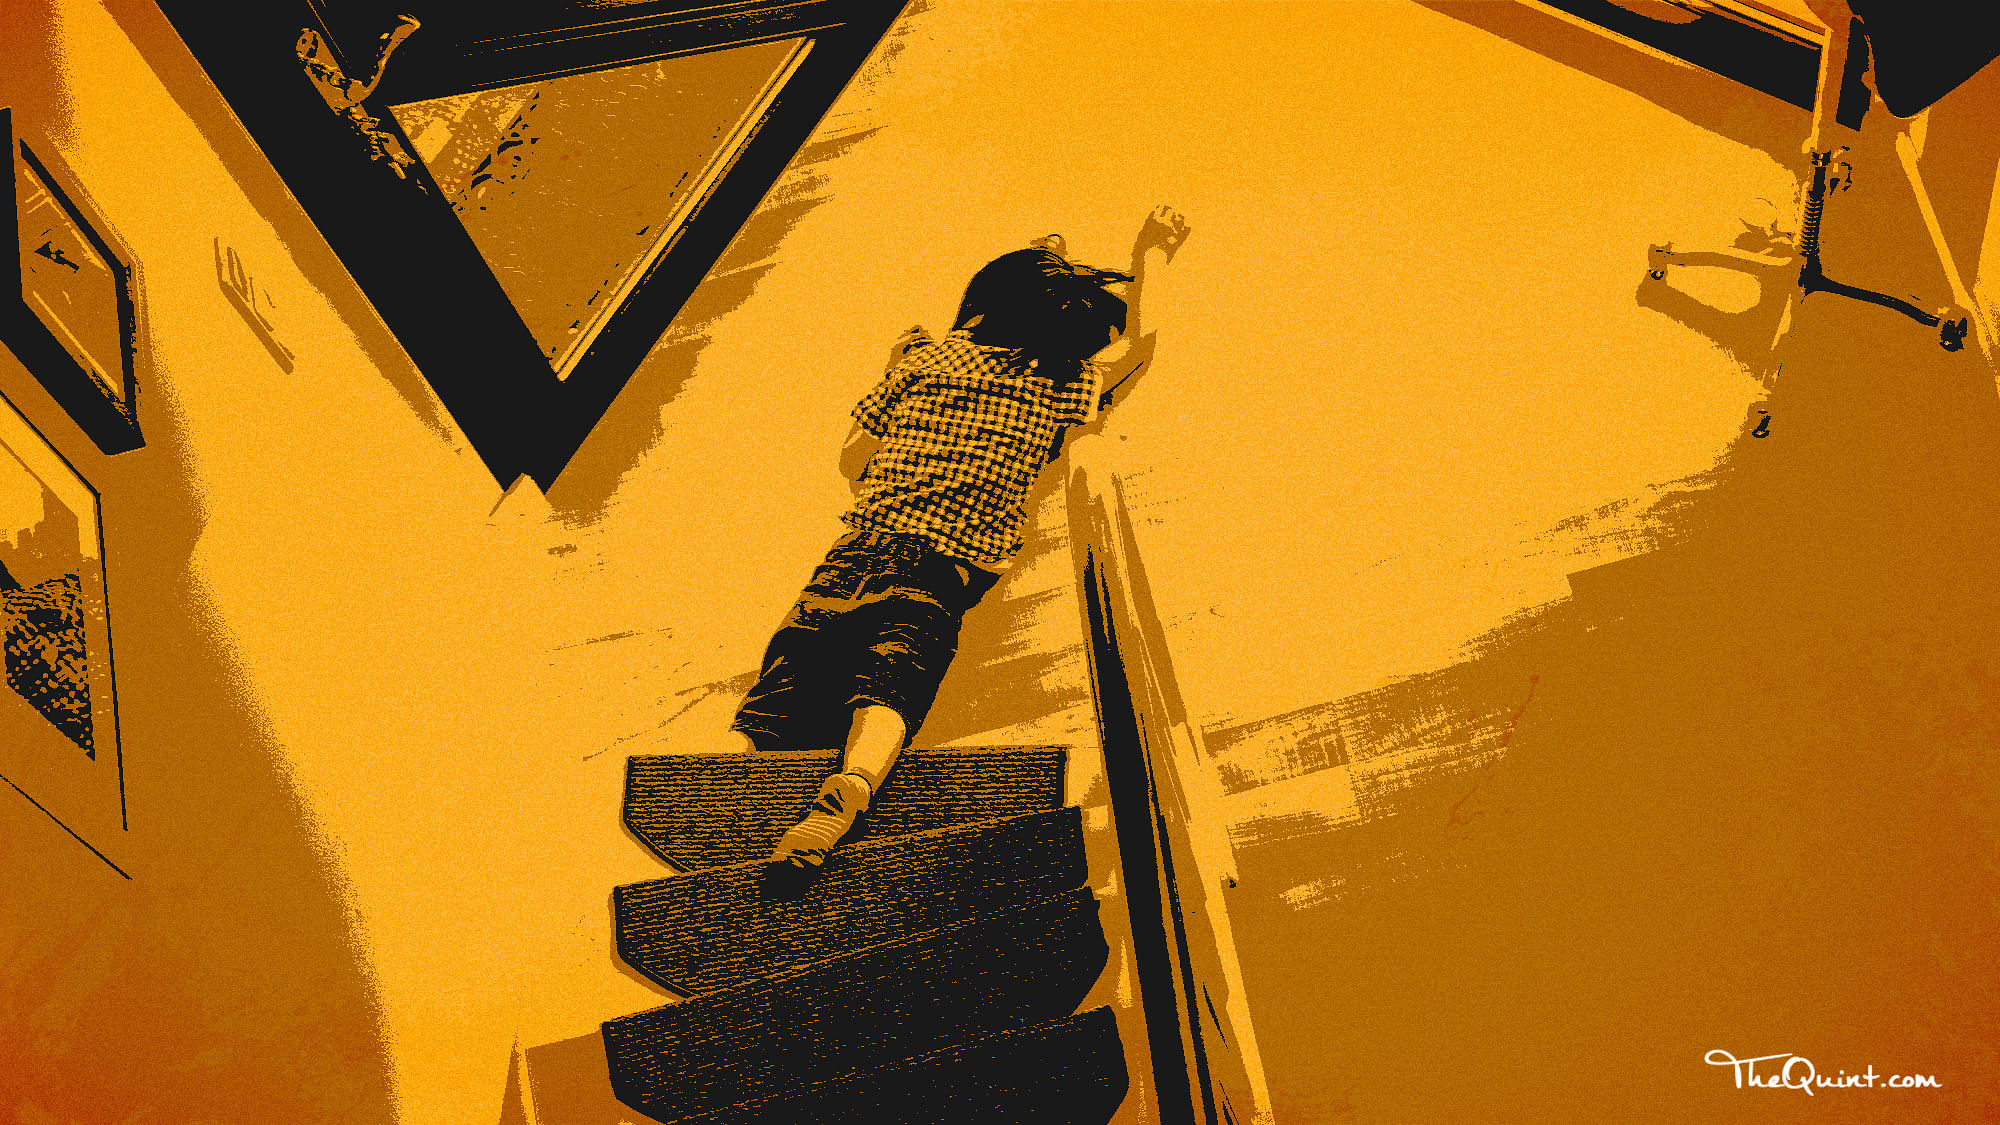 A woman throws her child off a staircase in New Delhi. (Photo Courtesy: The Quint)